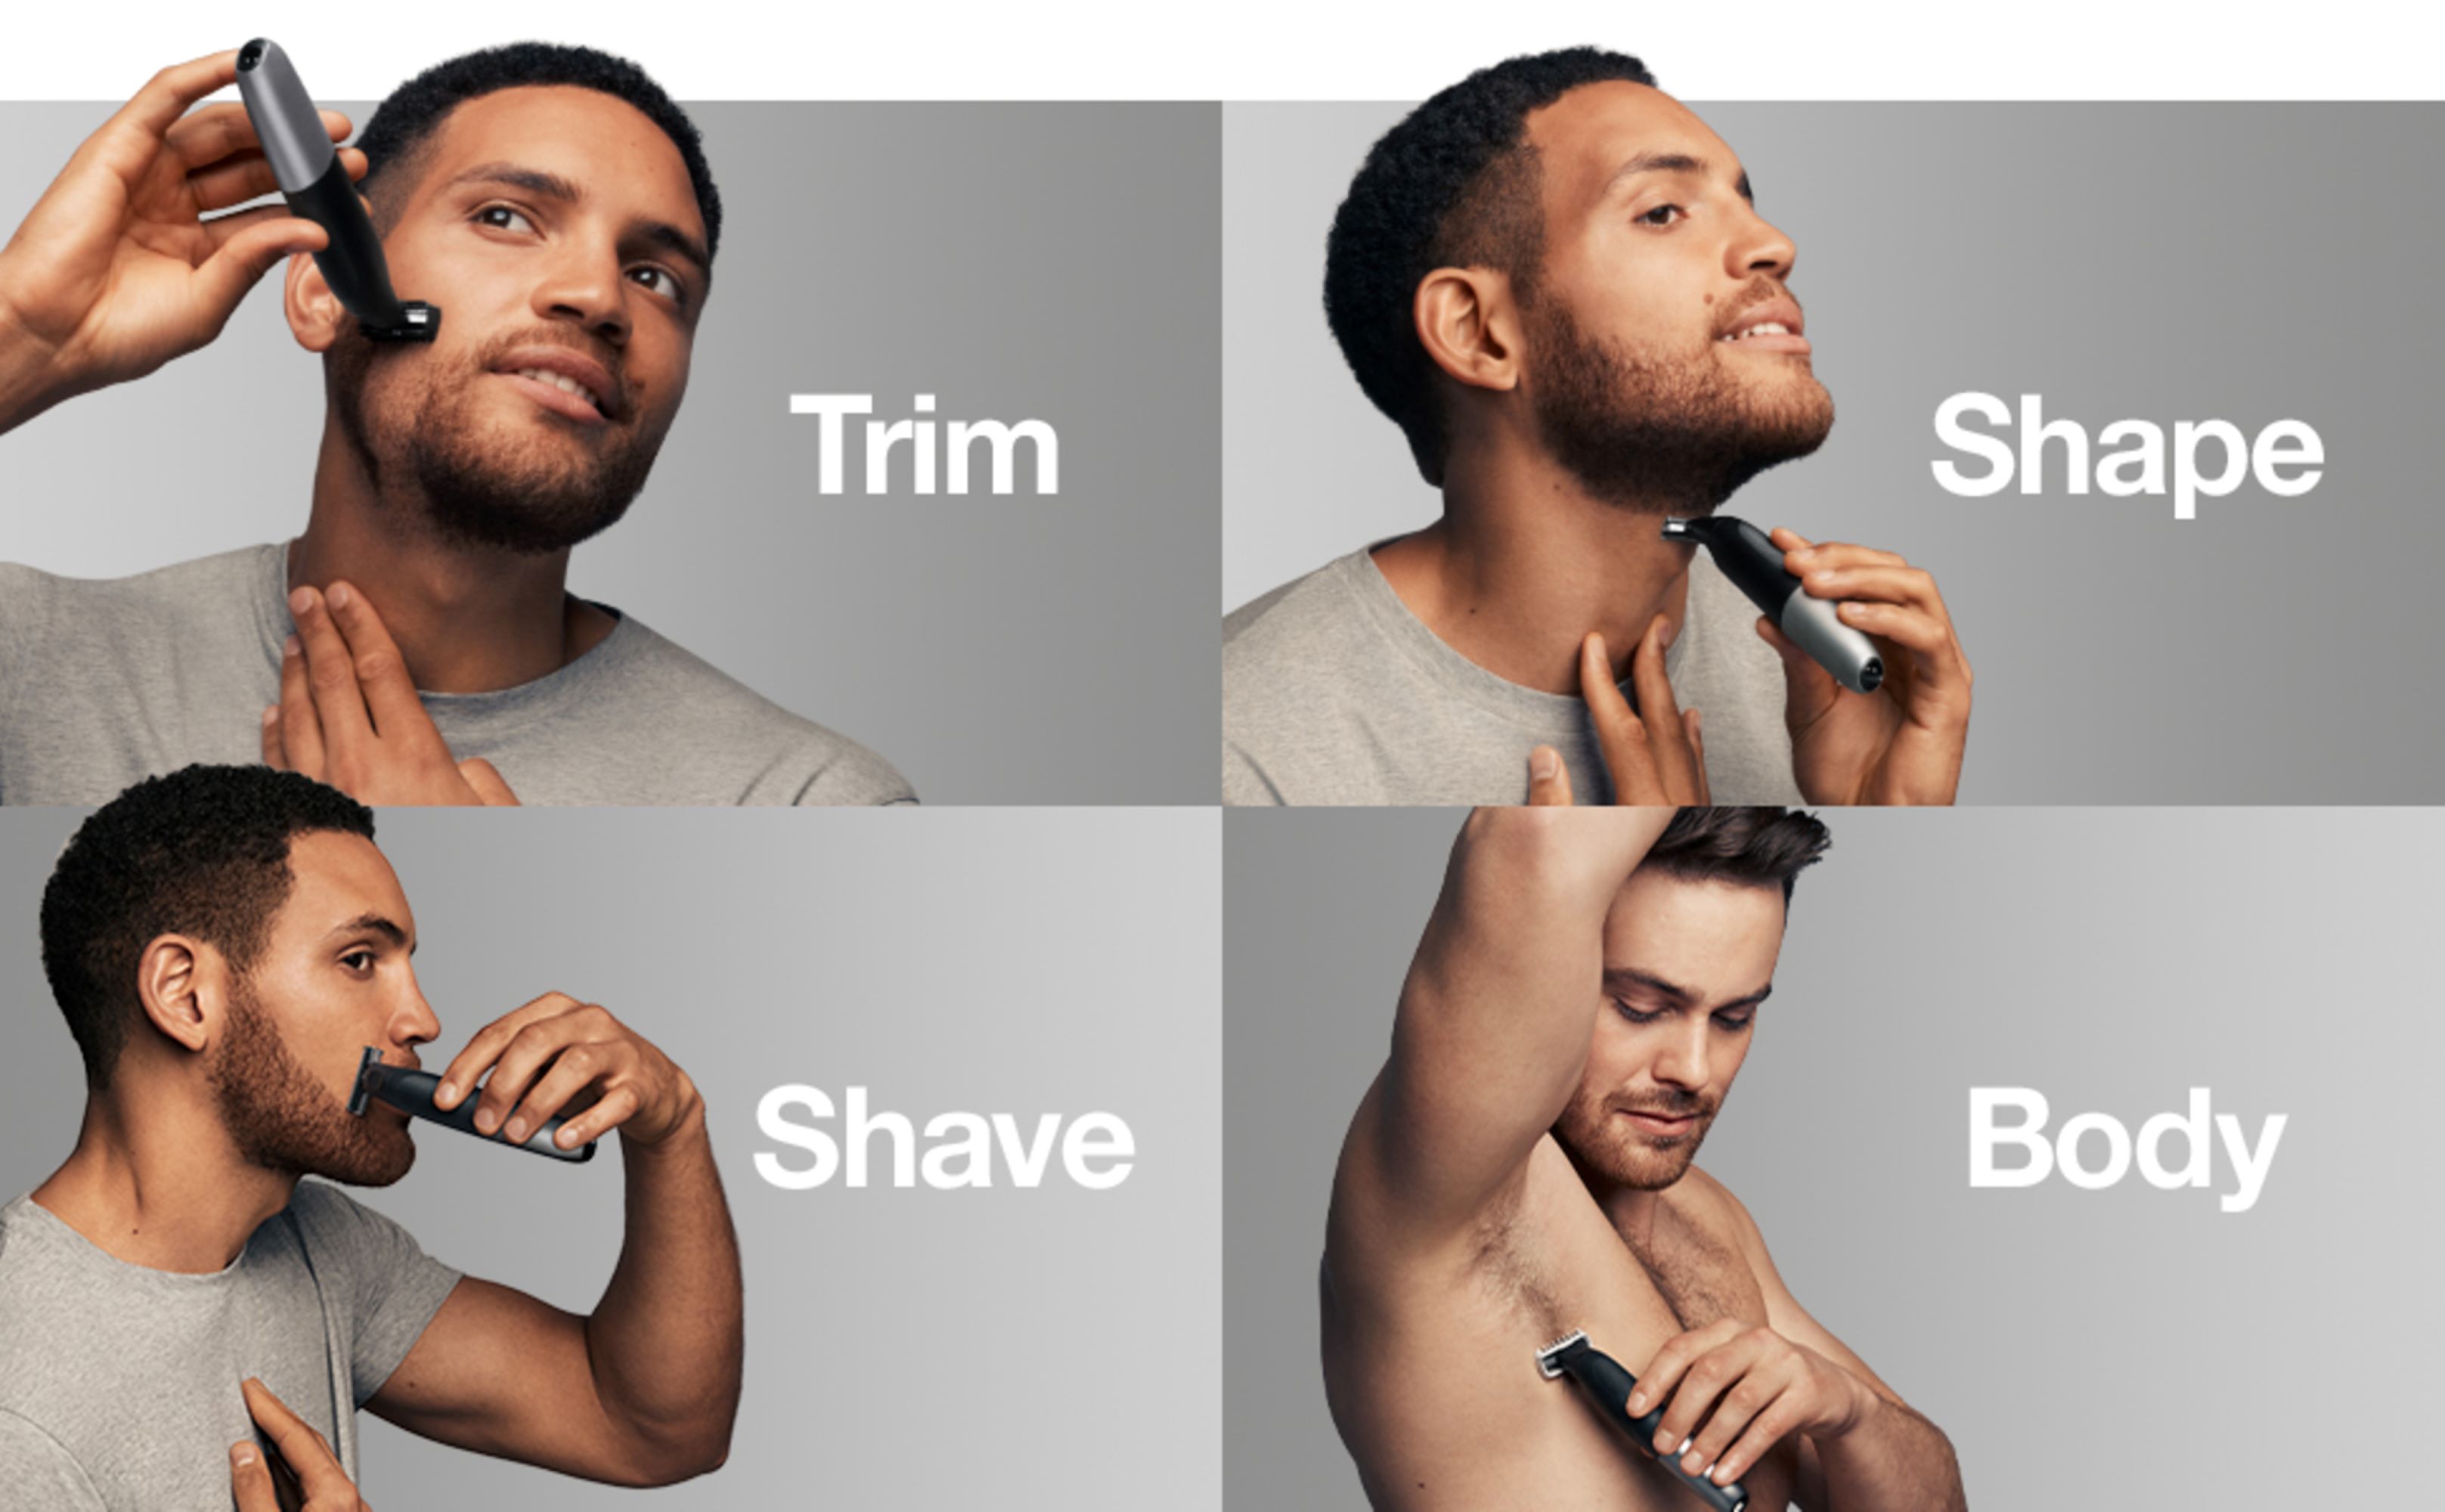 Trim, Style, Shave, Body